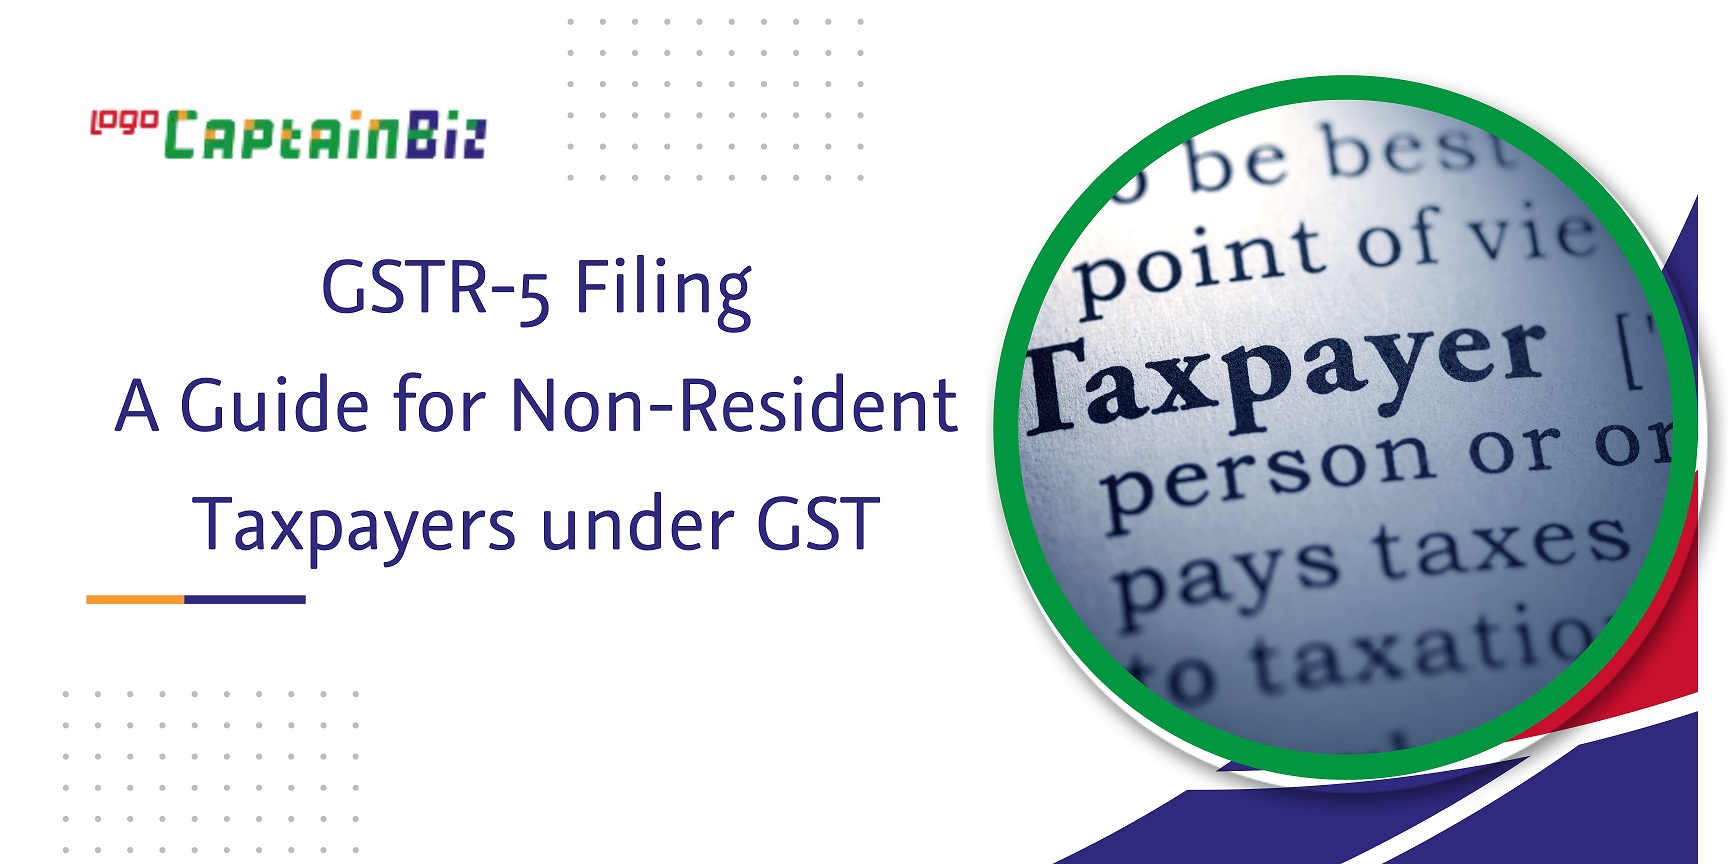 CaptainBiz: gstr-5 filing a guide for non-resident taxpayers under gst